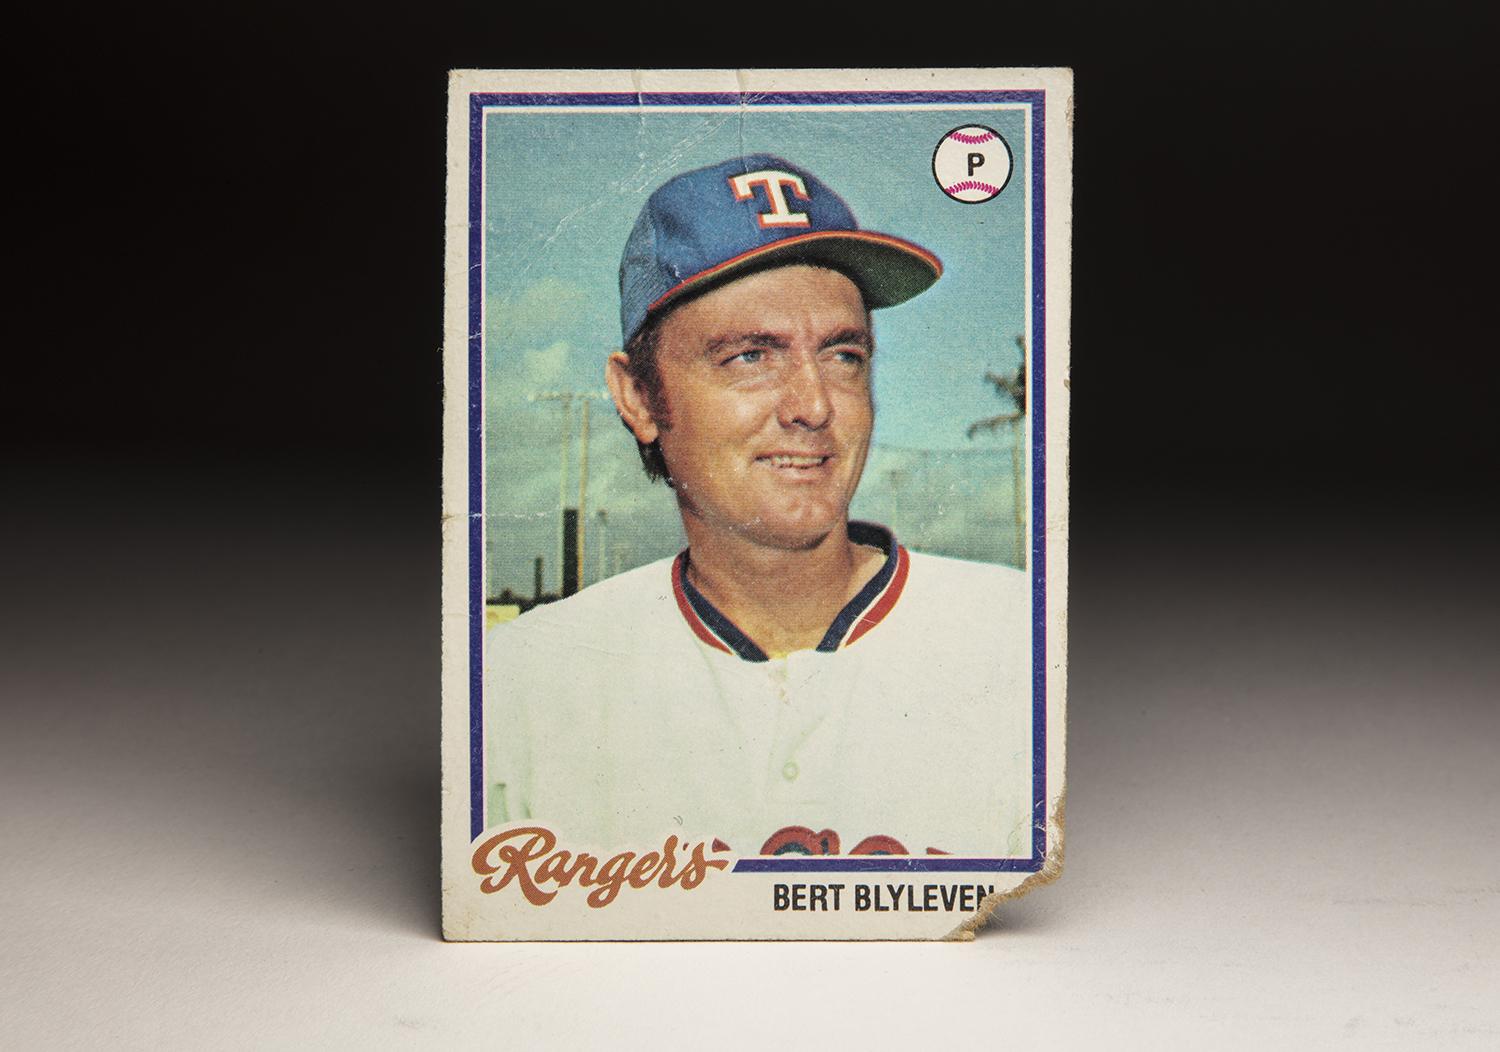  1992 O-Pee-Chee Baseball #375 Bert Blyleven California Angels  HOF Official Bilingual MLB Trading Card That Parallels the 1992 Topps Set :  Collectibles & Fine Art